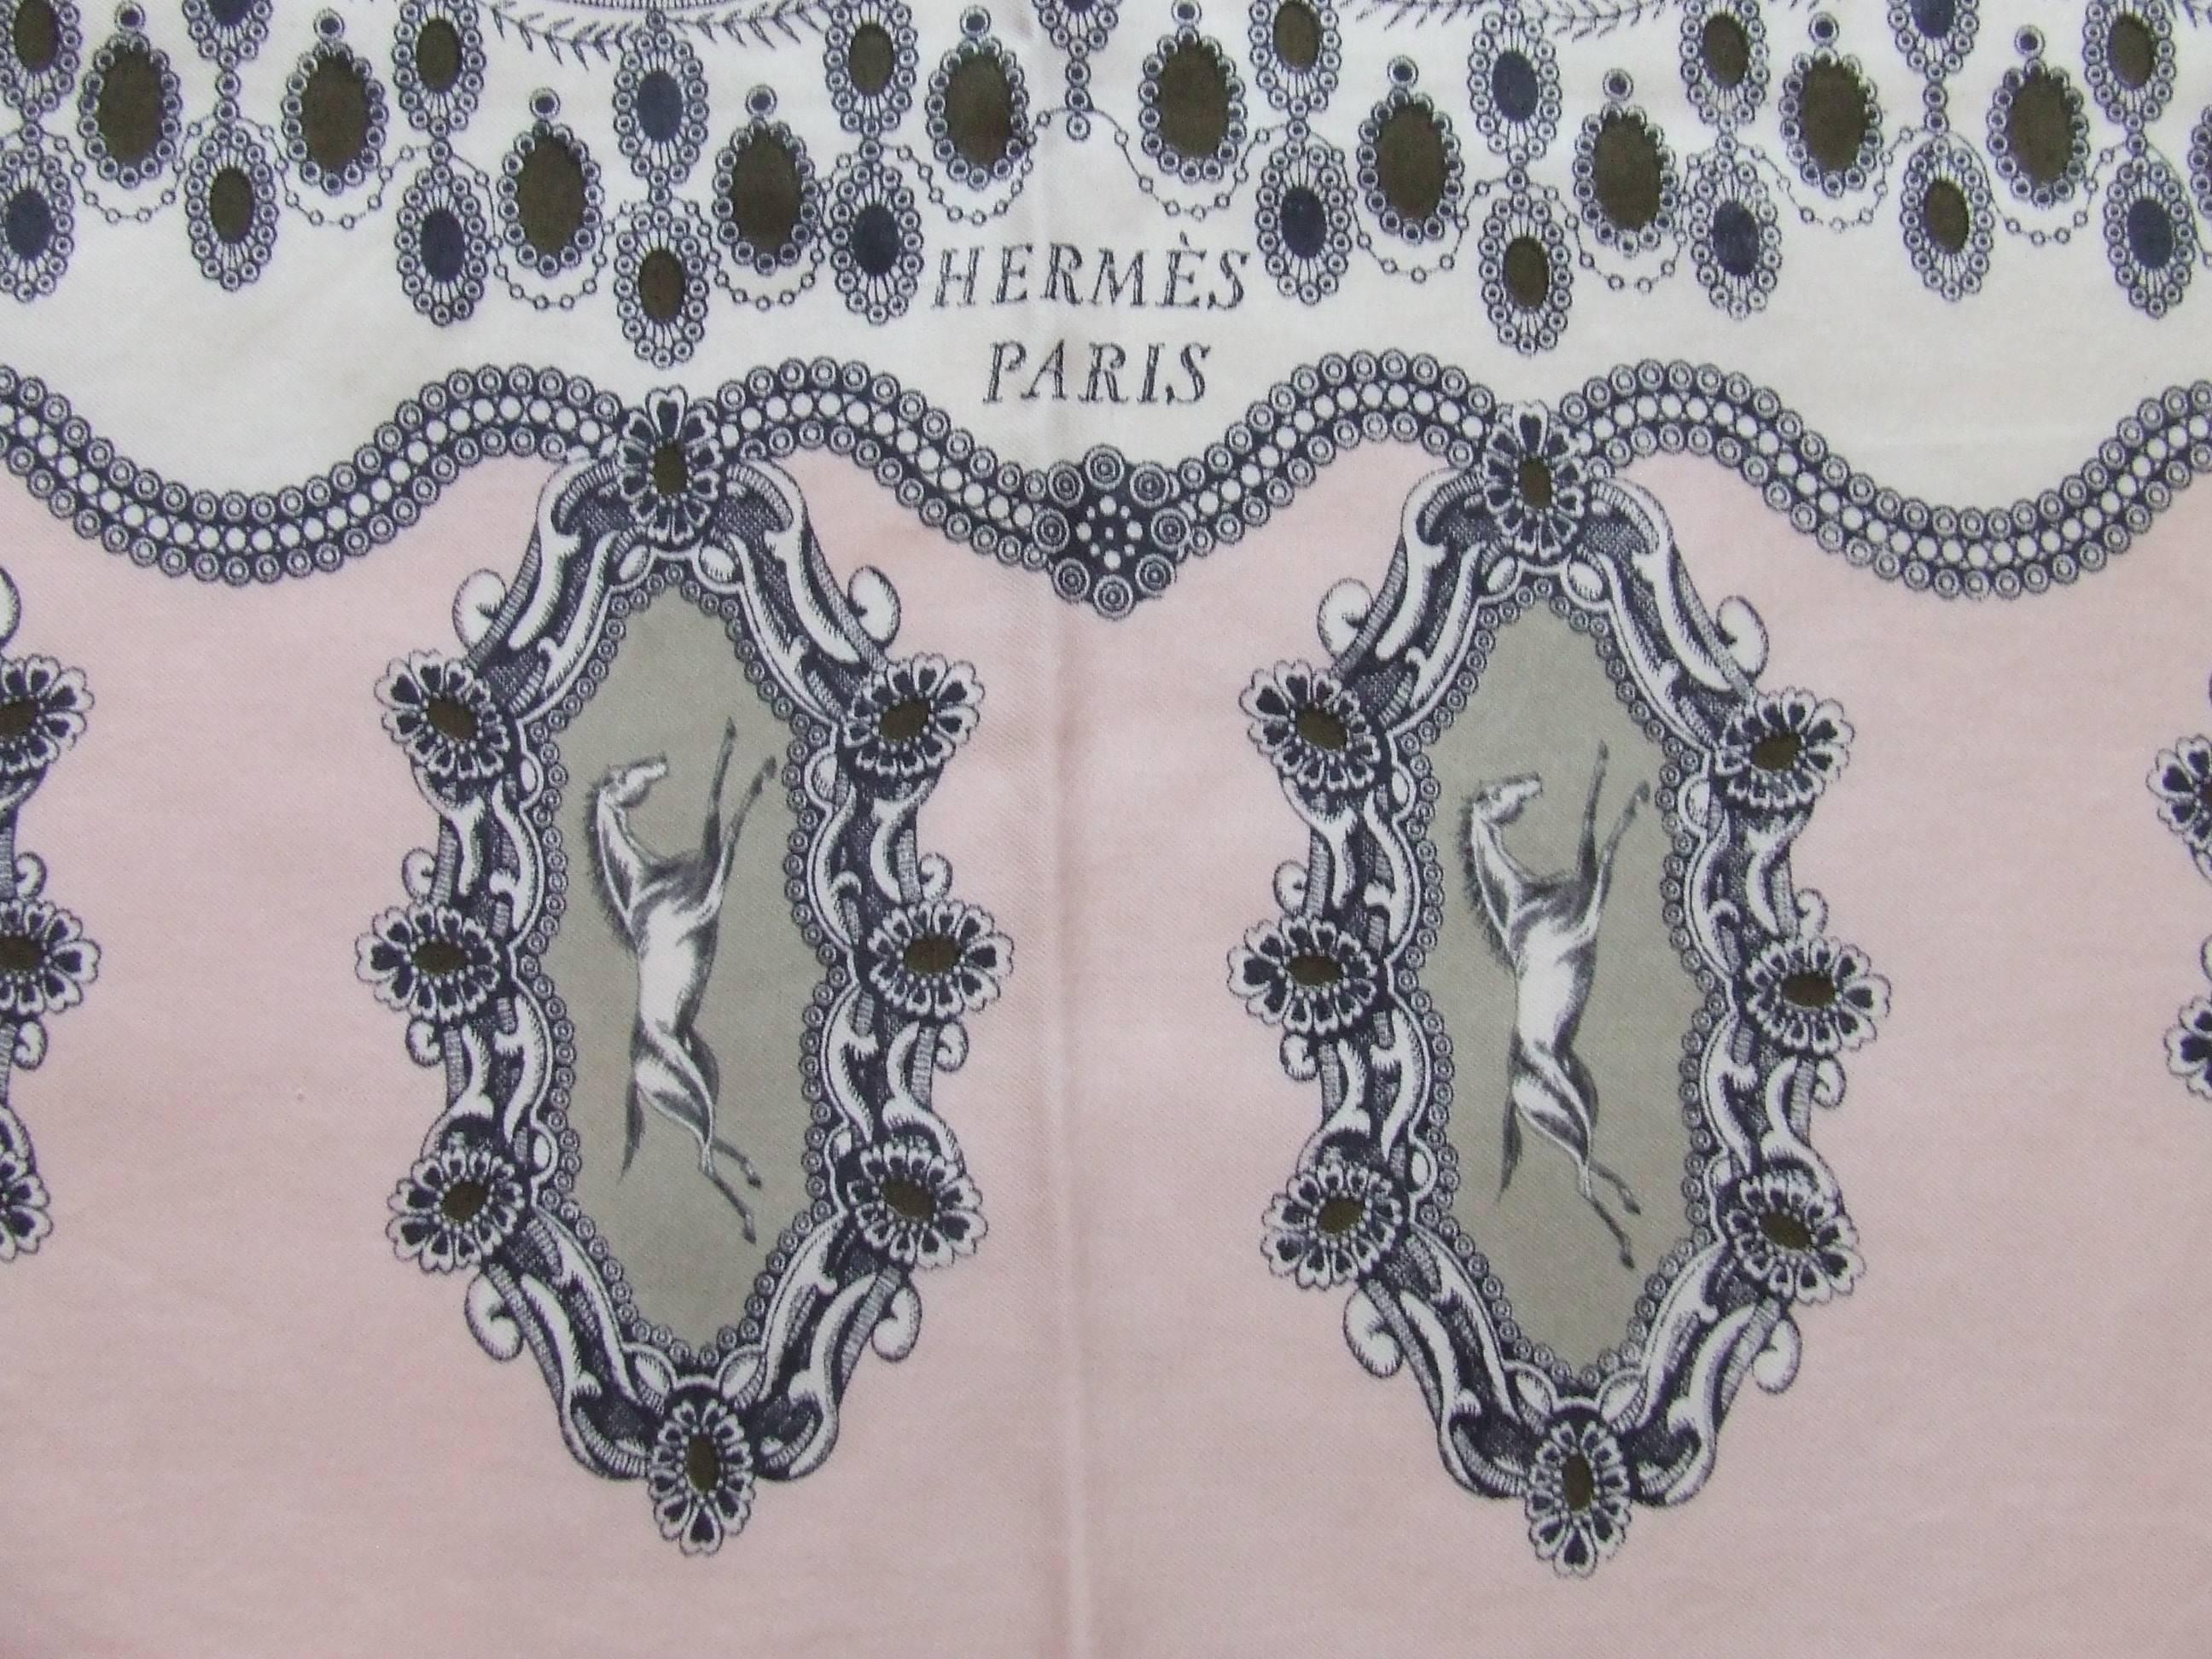 Authentic Hermes Vintage Scarf

Pattern: "Chevaux en Cameos"

Designed by Jacques Eudel in 1963

Made in France

Made of 100% Silk

Colorways: Pink Background, Green, Khaki, White, Grey

"HERMES PARIS", "Jacques